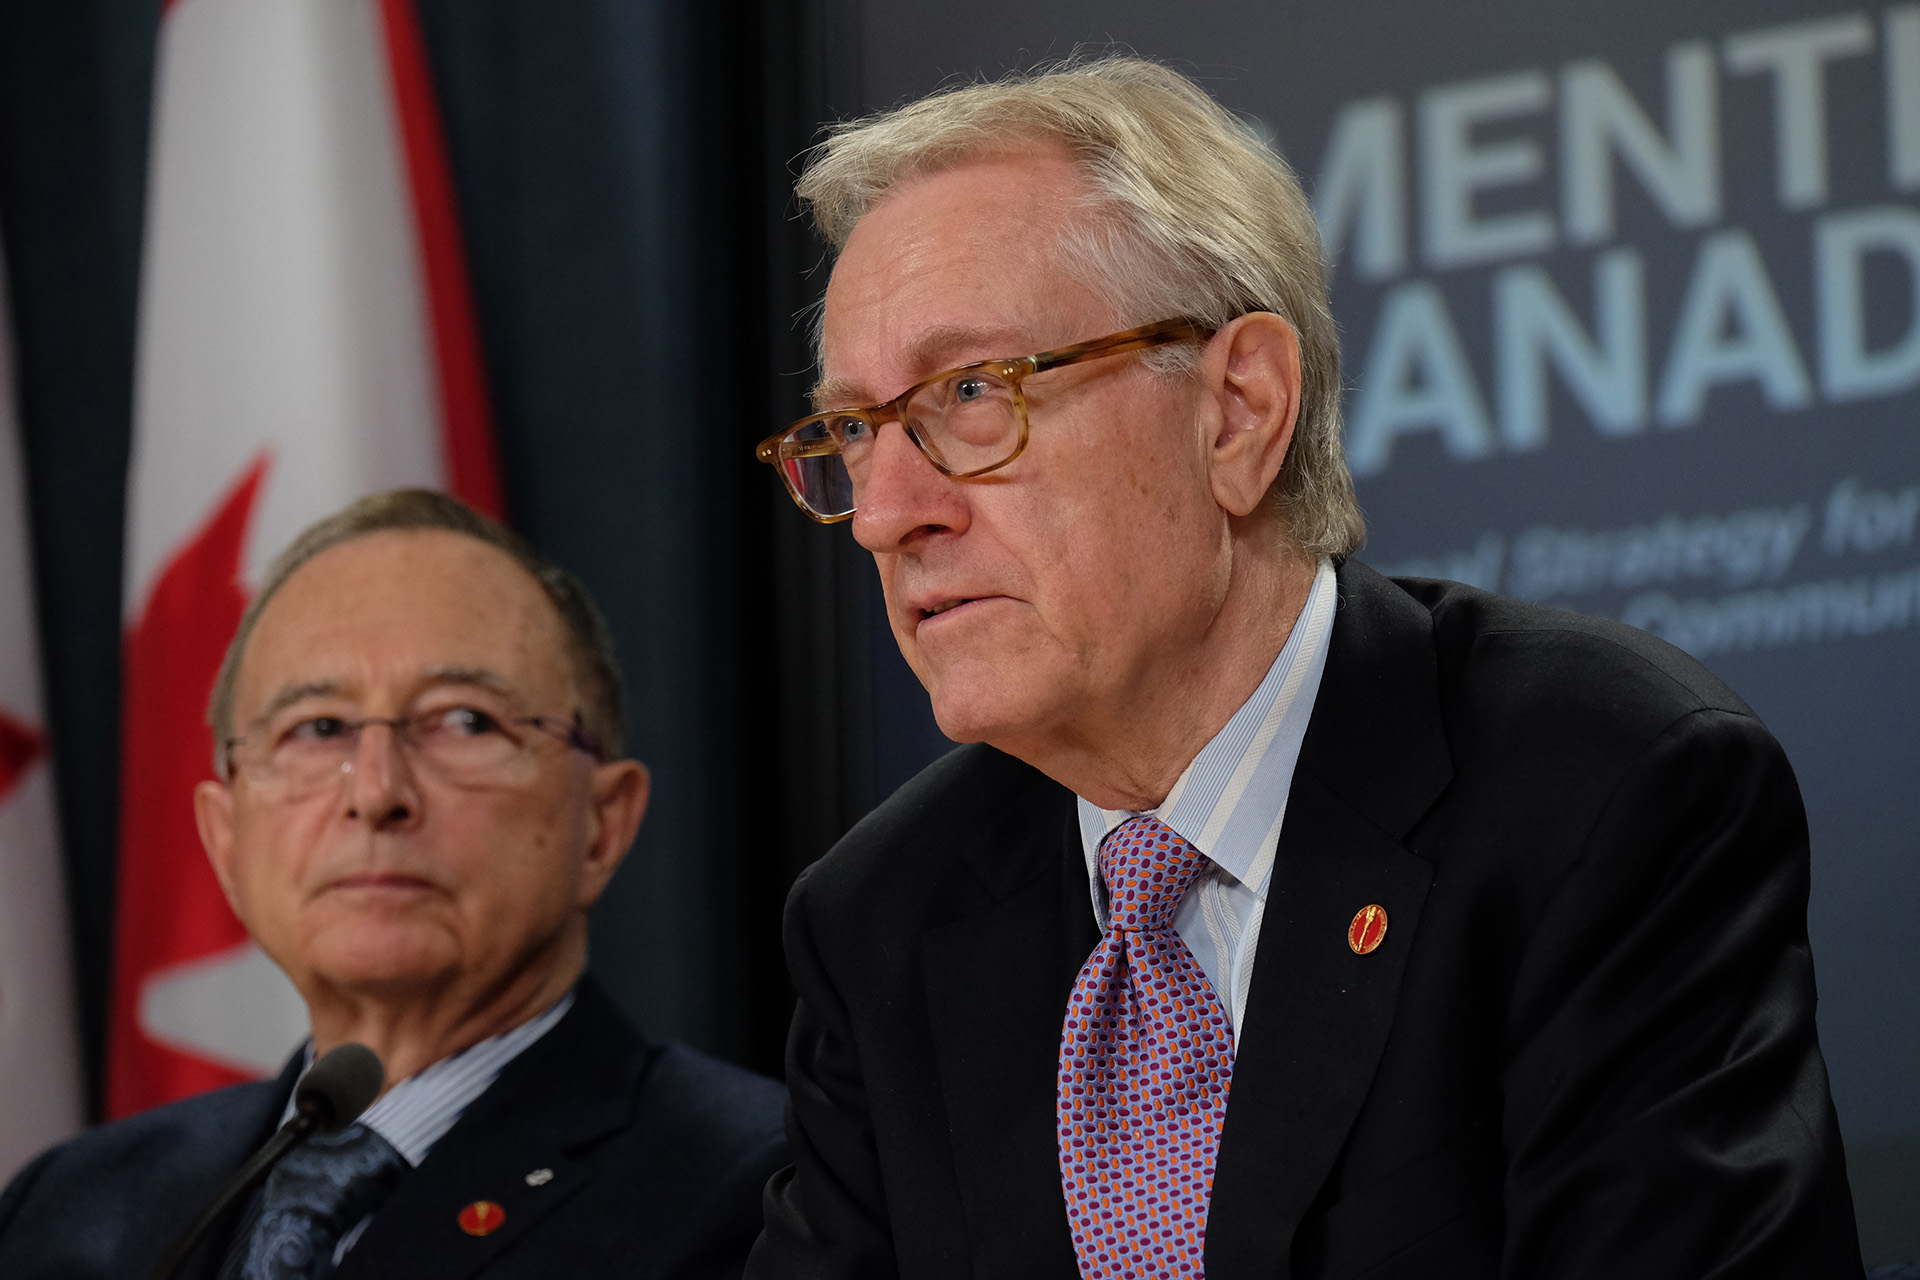 Senator Art Eggleton, right, speaks at a press conference on November 15, 2016, after the release of the social affairs committee’s report on dementia.